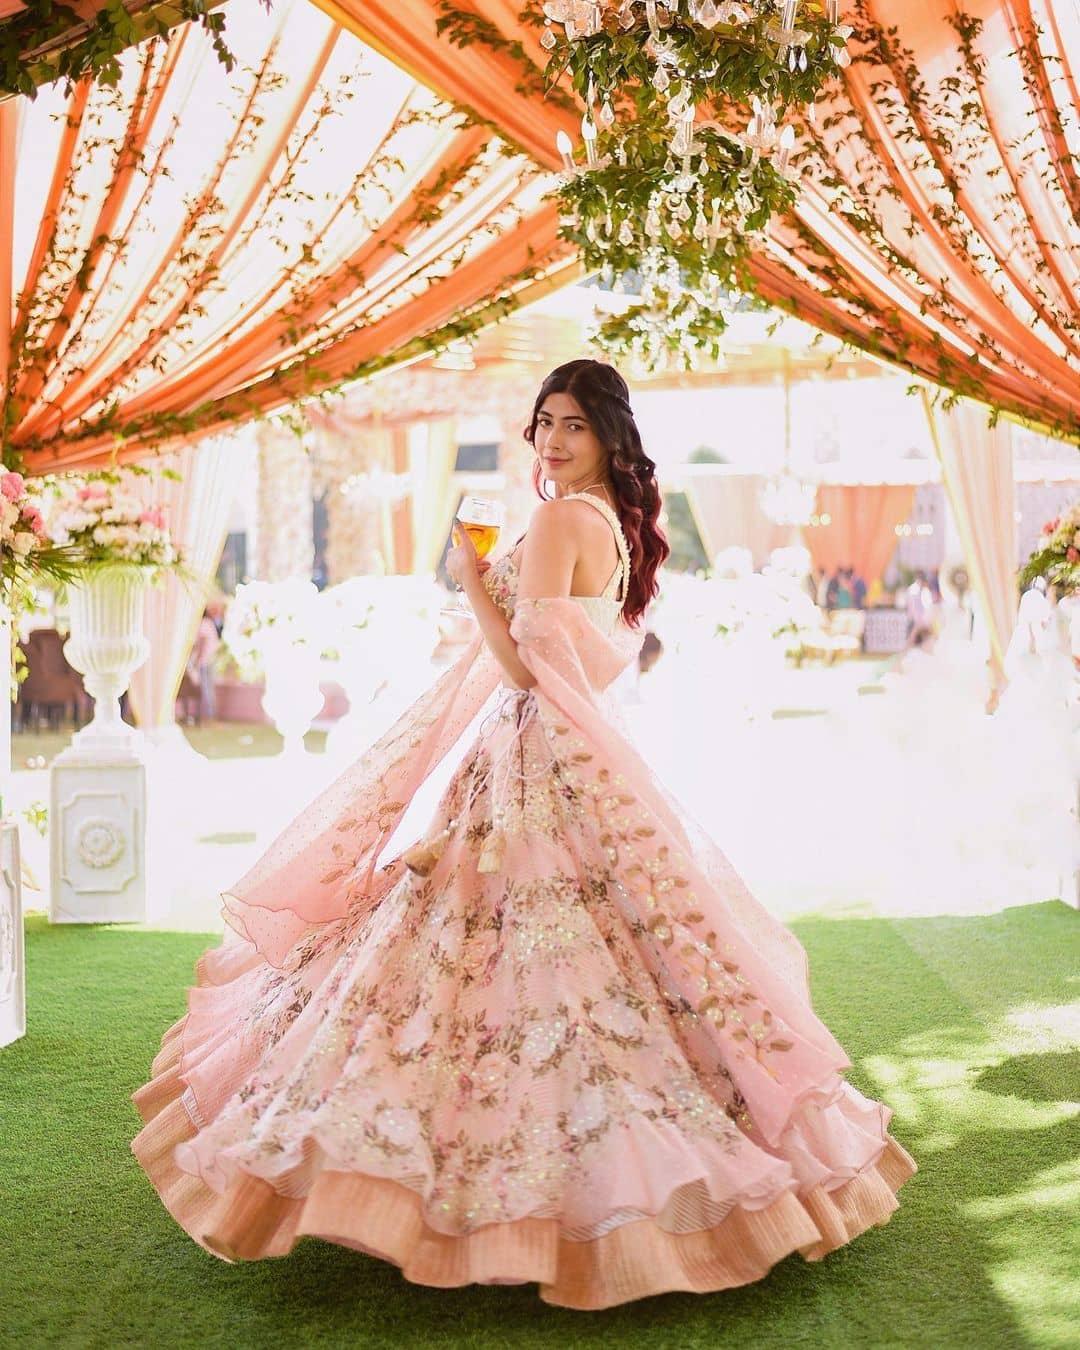 a woman wearing a baby pink floral lehenga while holding a glass of drink in her hand | Wedifys